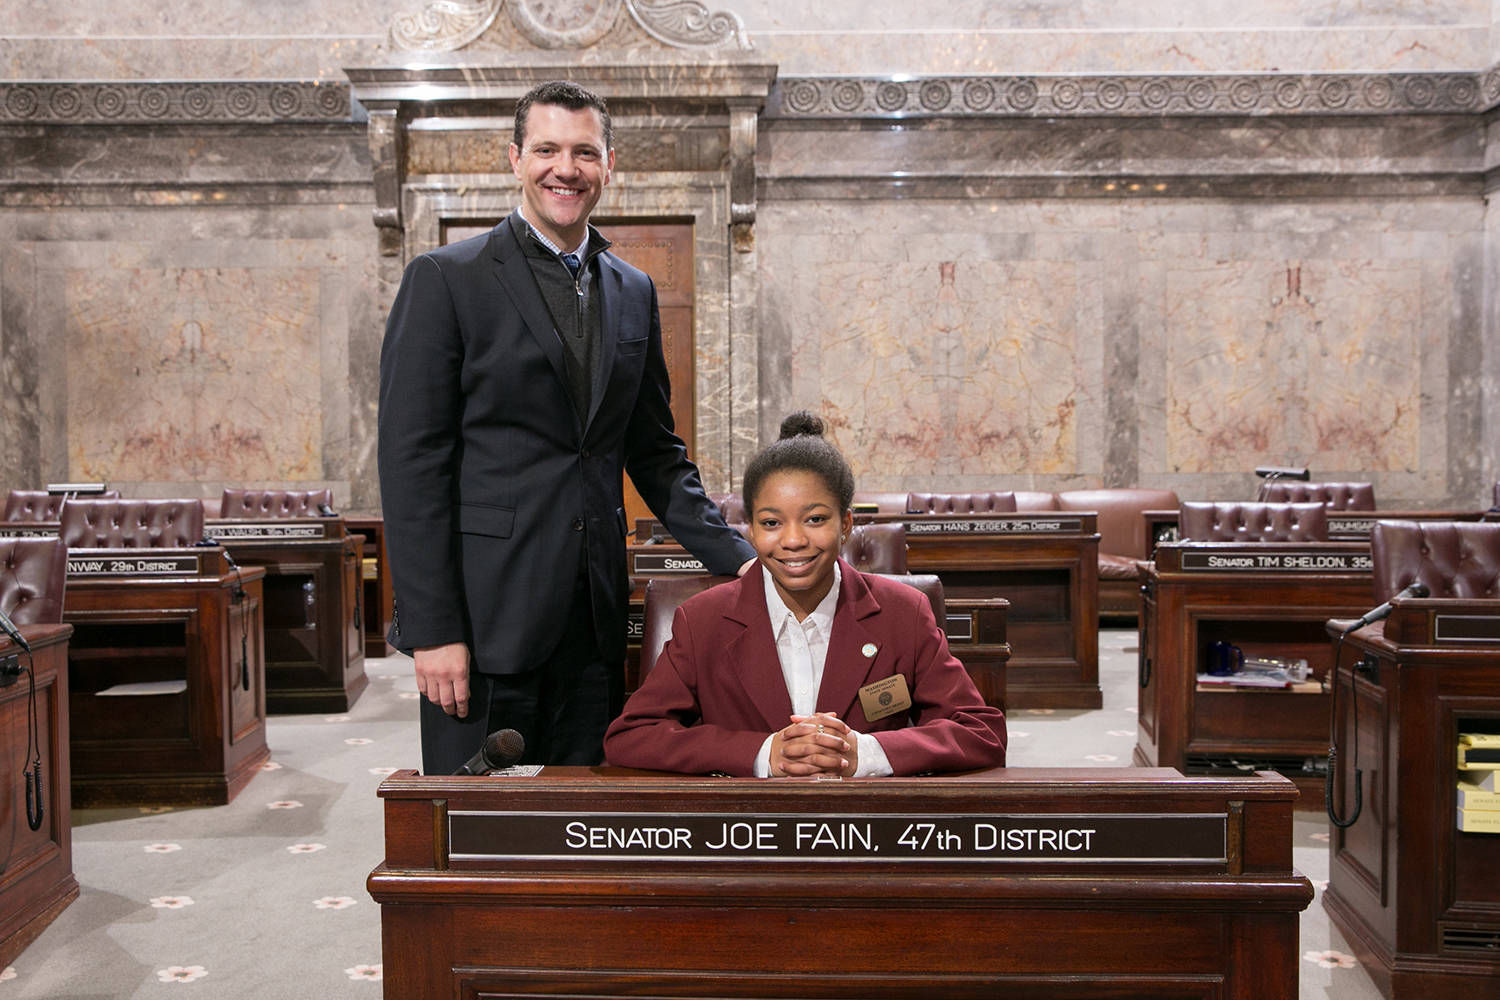 Kent student serves as page for Sen. Fain